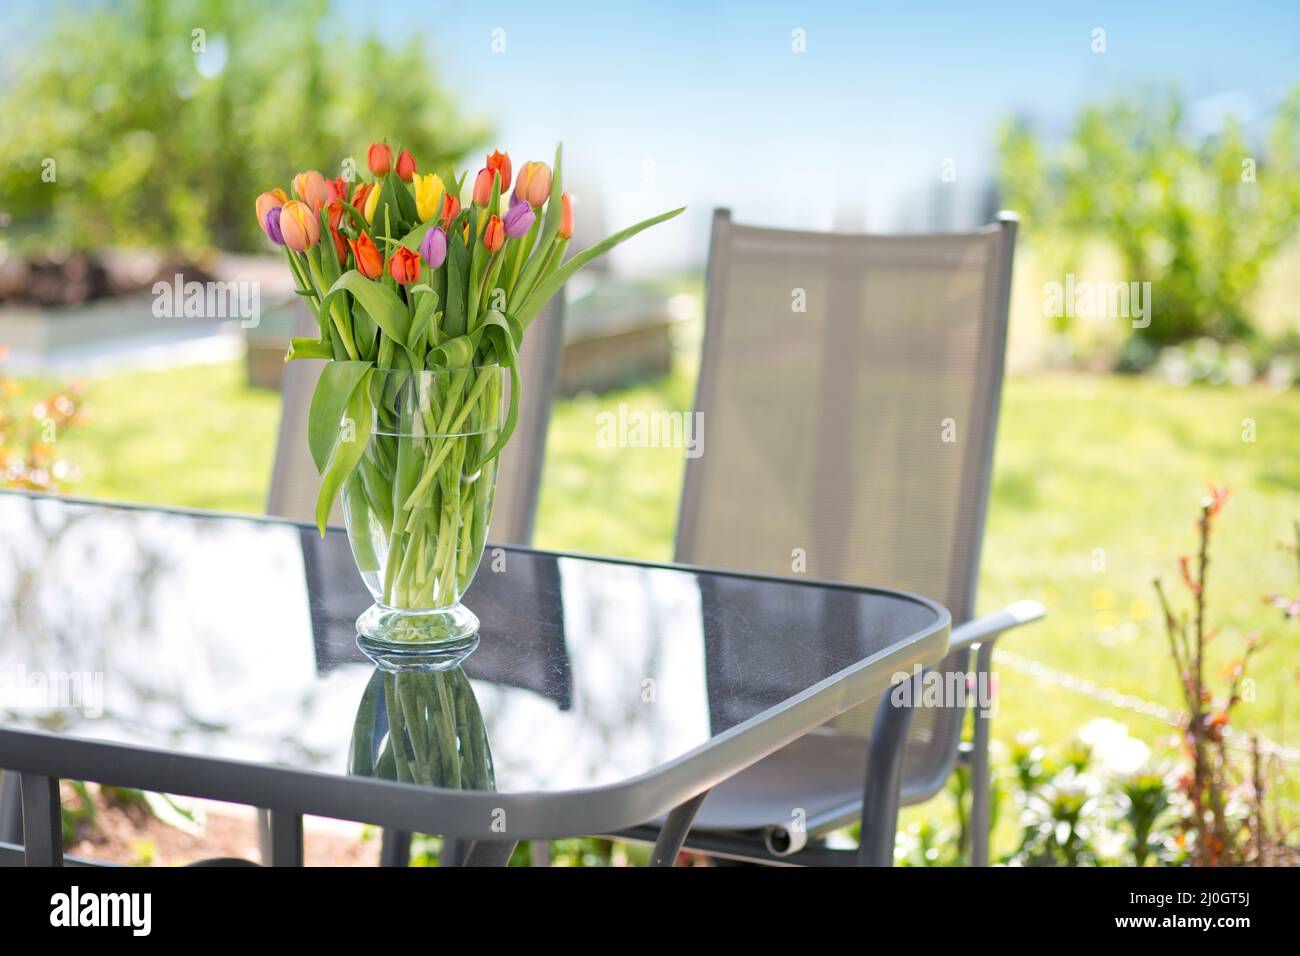 Beautiful flowers bouquet in vase on the glass table. Stock Photo